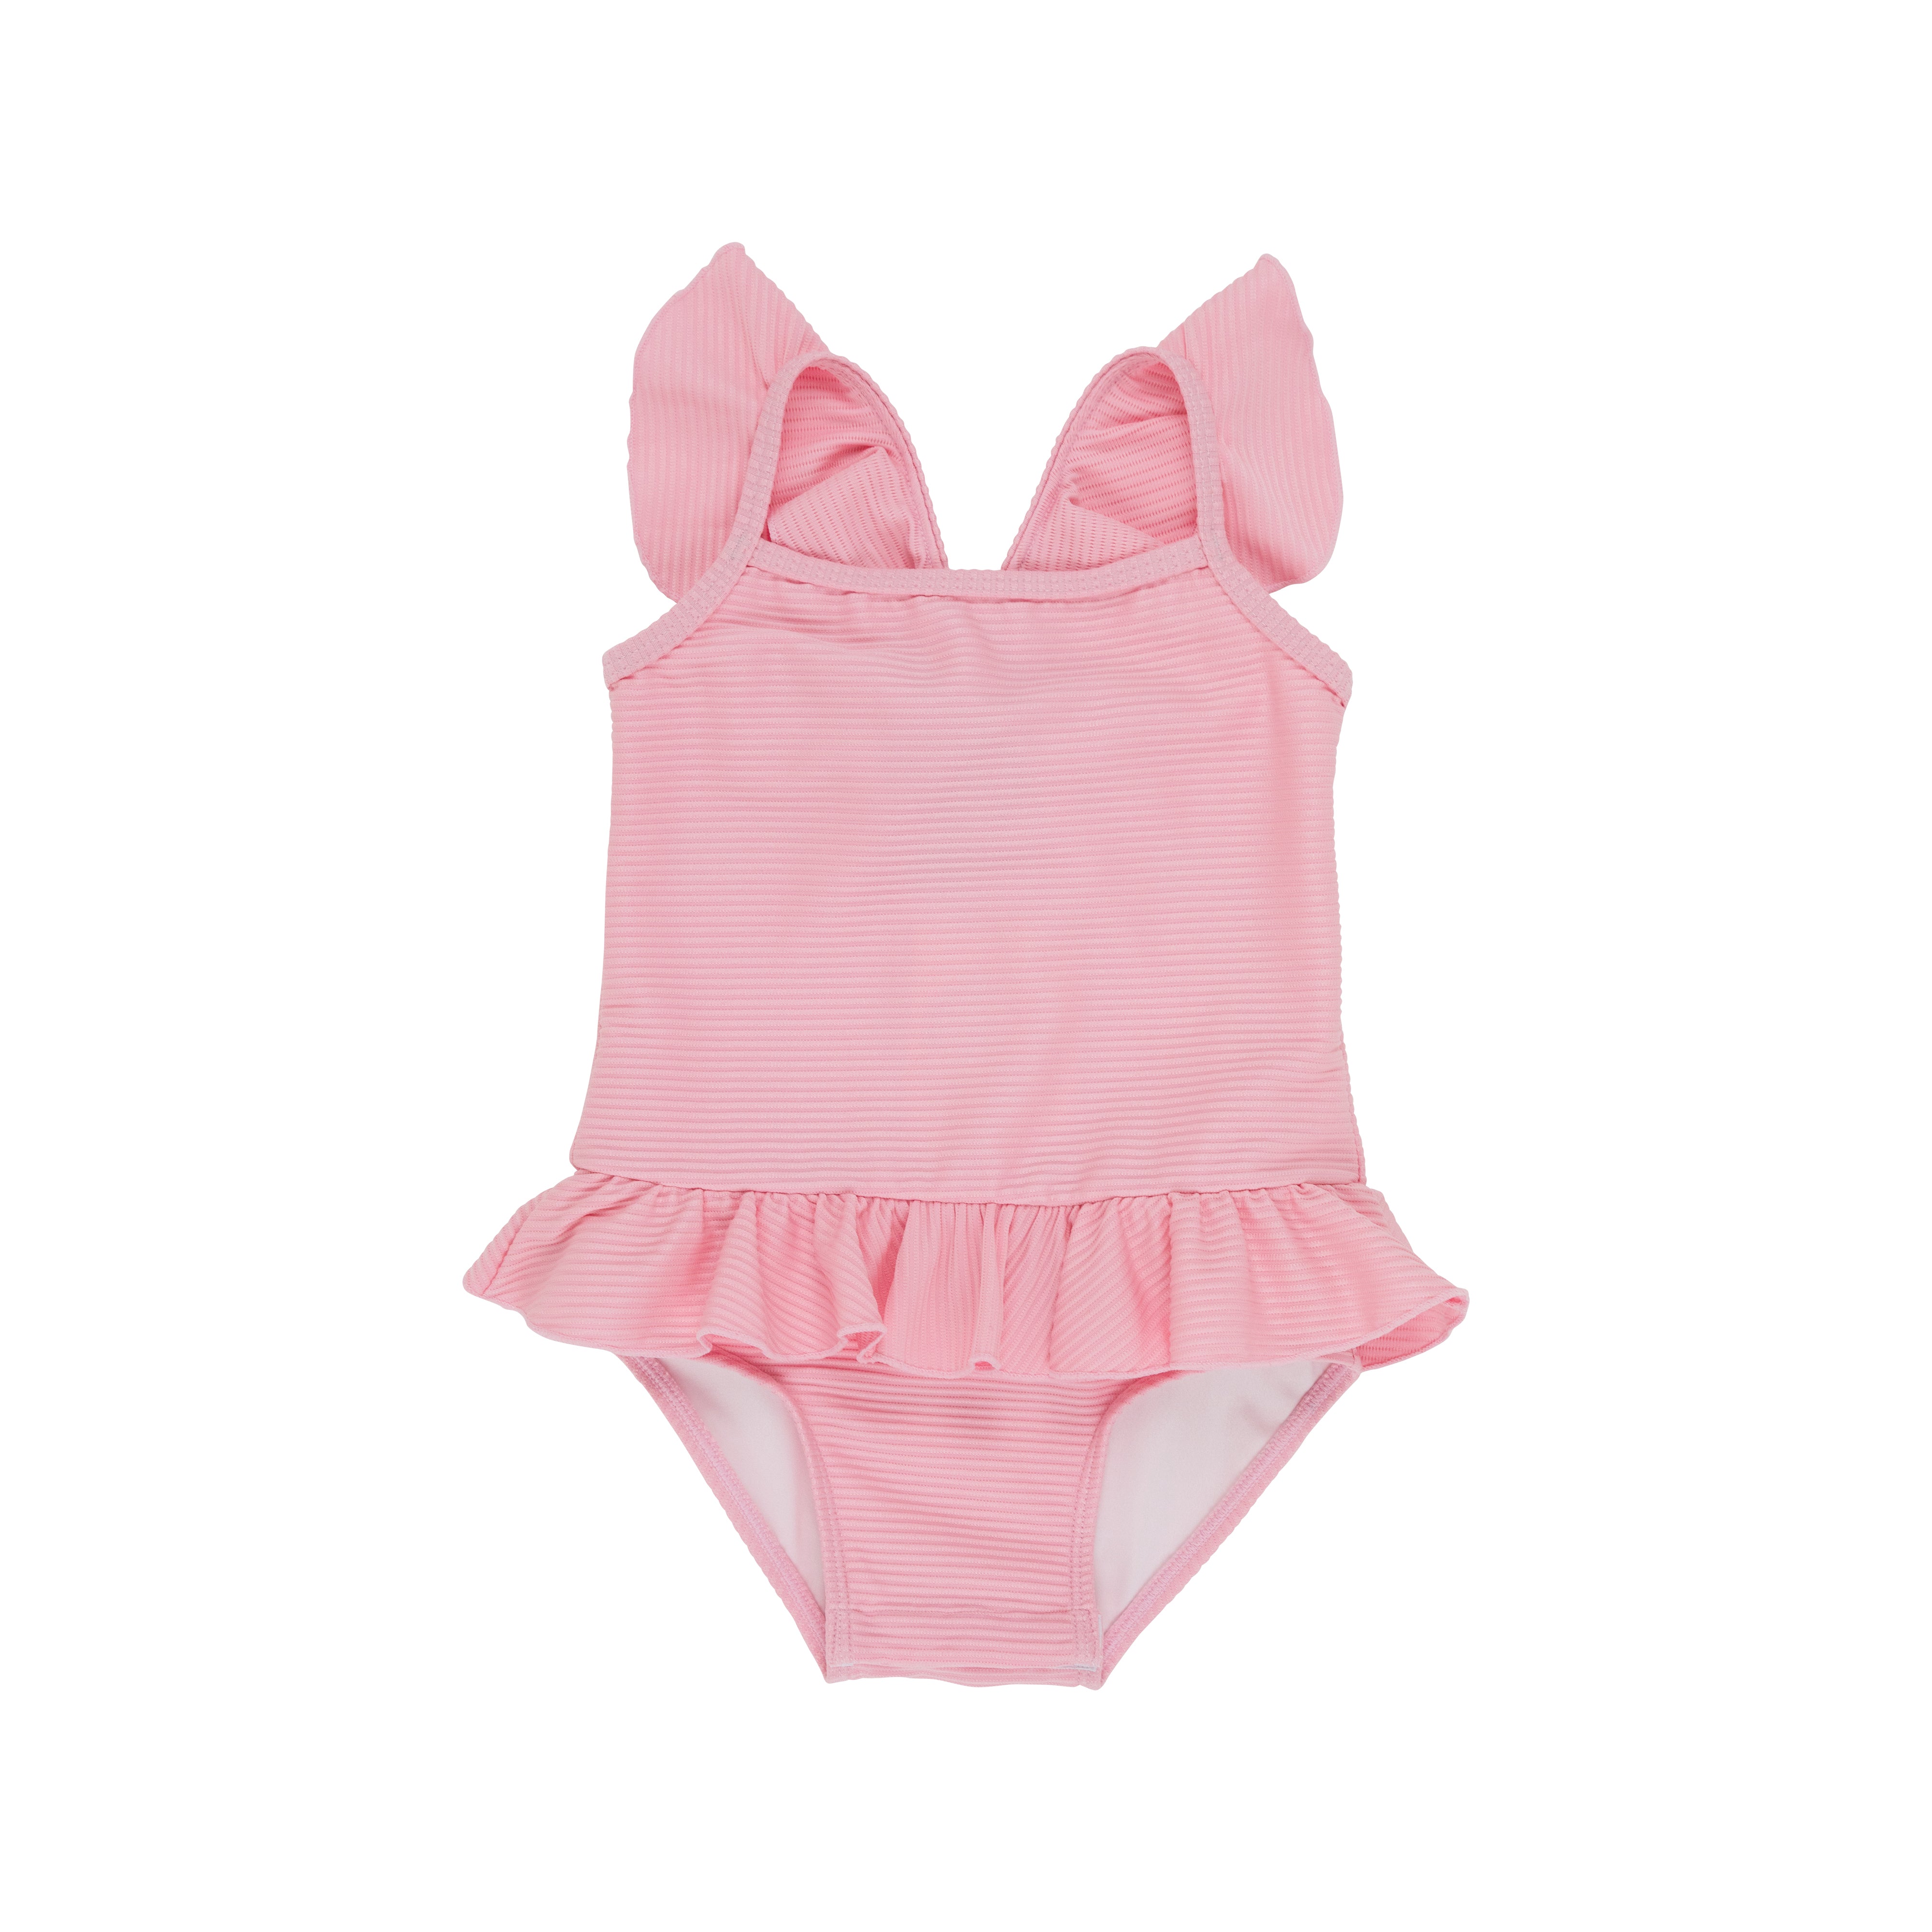 St. Lucia Swimsuit (Ribbed) - Pier Party Pink – The Beaufort Bonnet Company